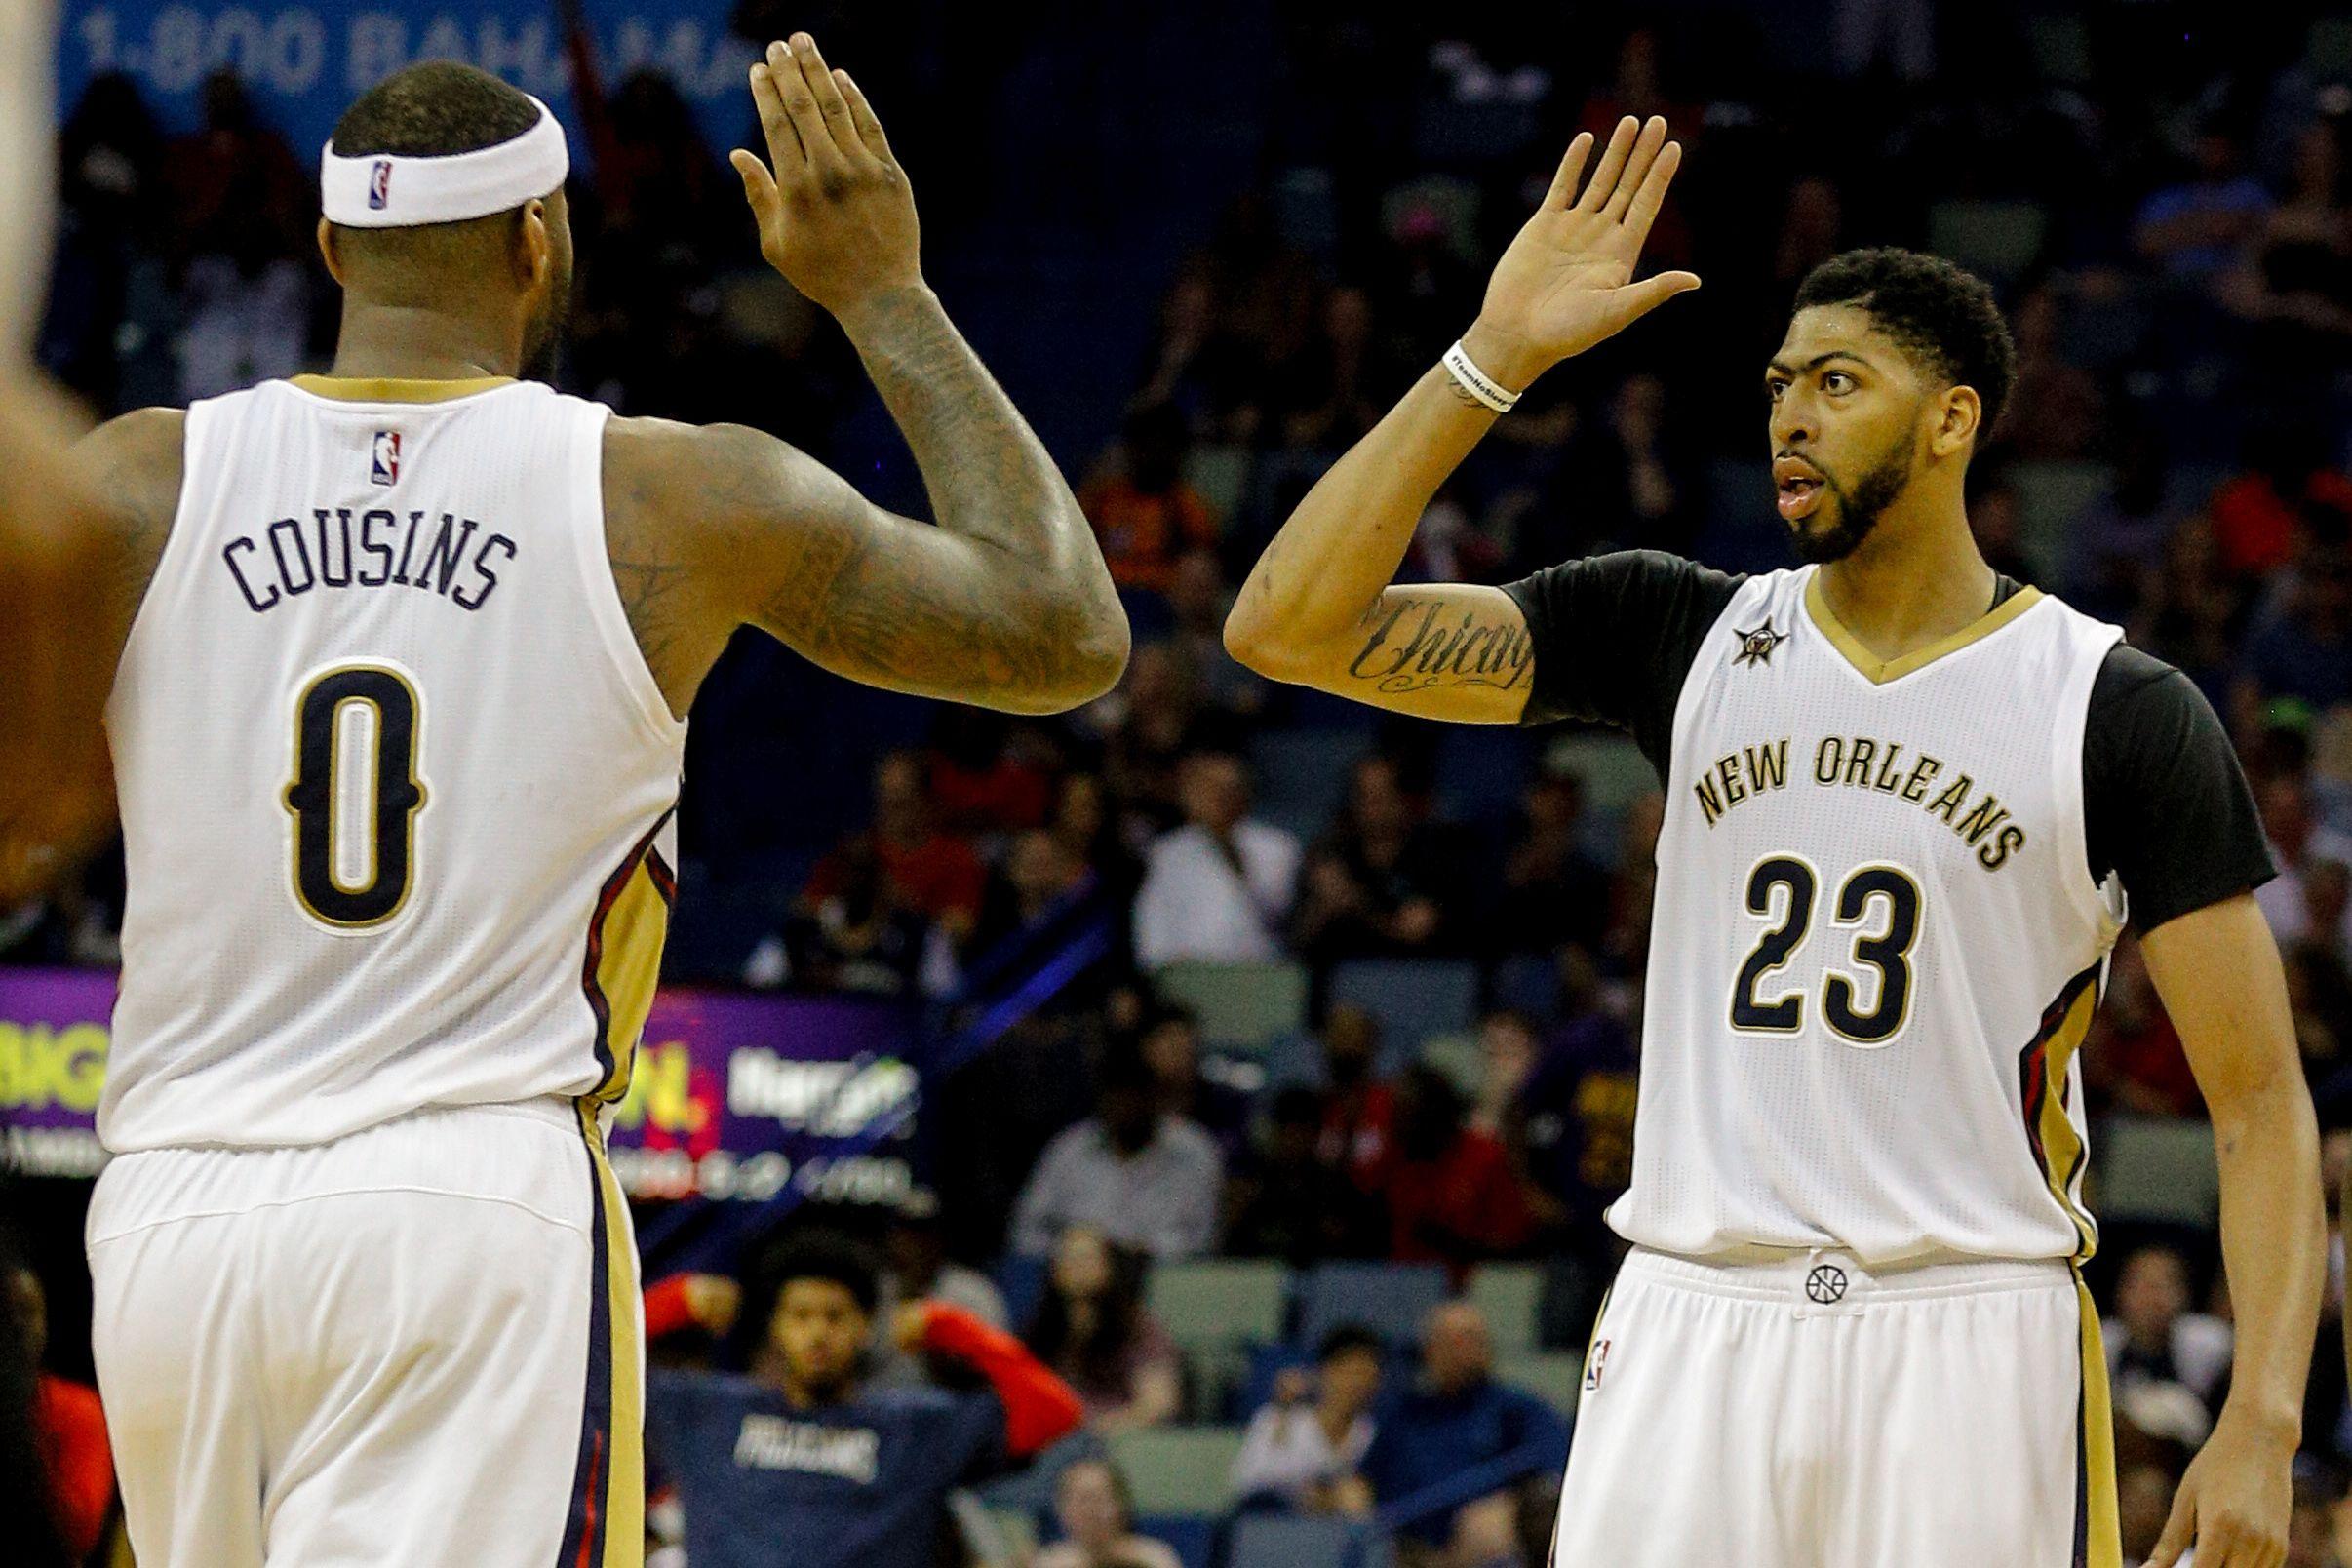 If history repeats, a healthy Anthony Davis and DeMarcus Cousins